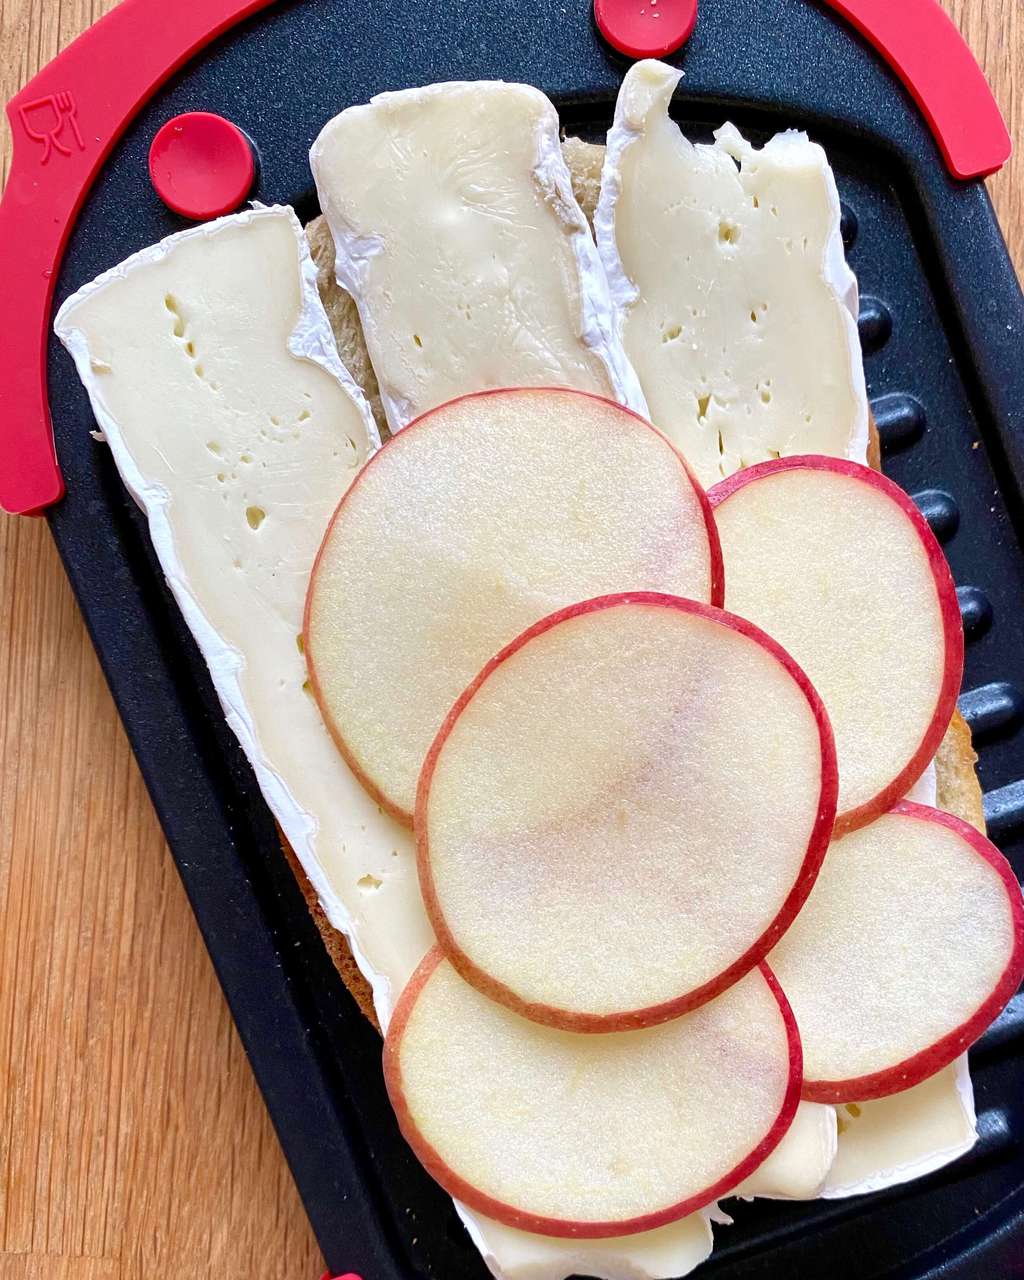 apples and brie on grilled cheese